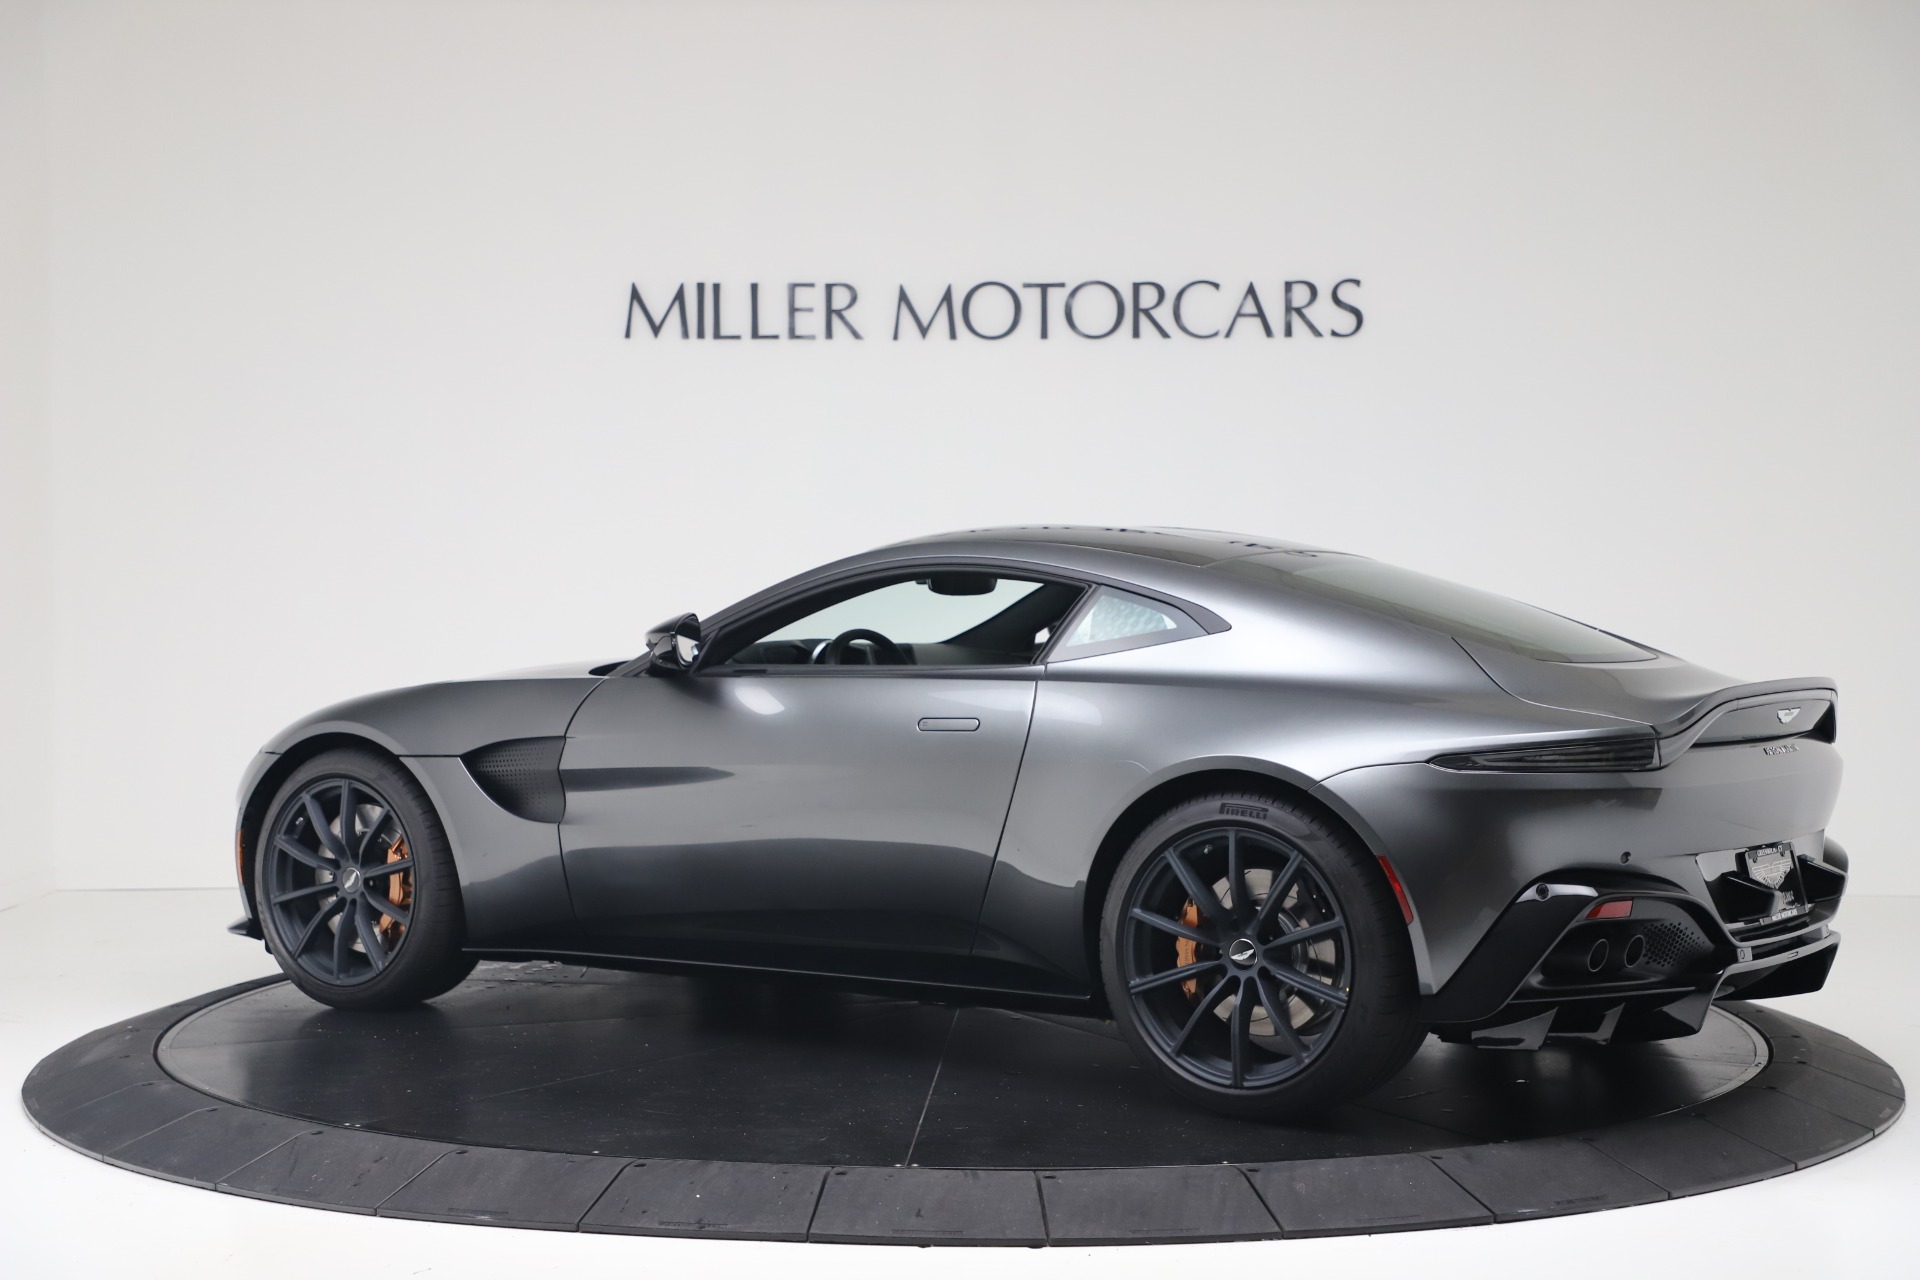 New 2020 Aston Martin Vantage Coupe For Sale (Special Pricing) | Aston ...